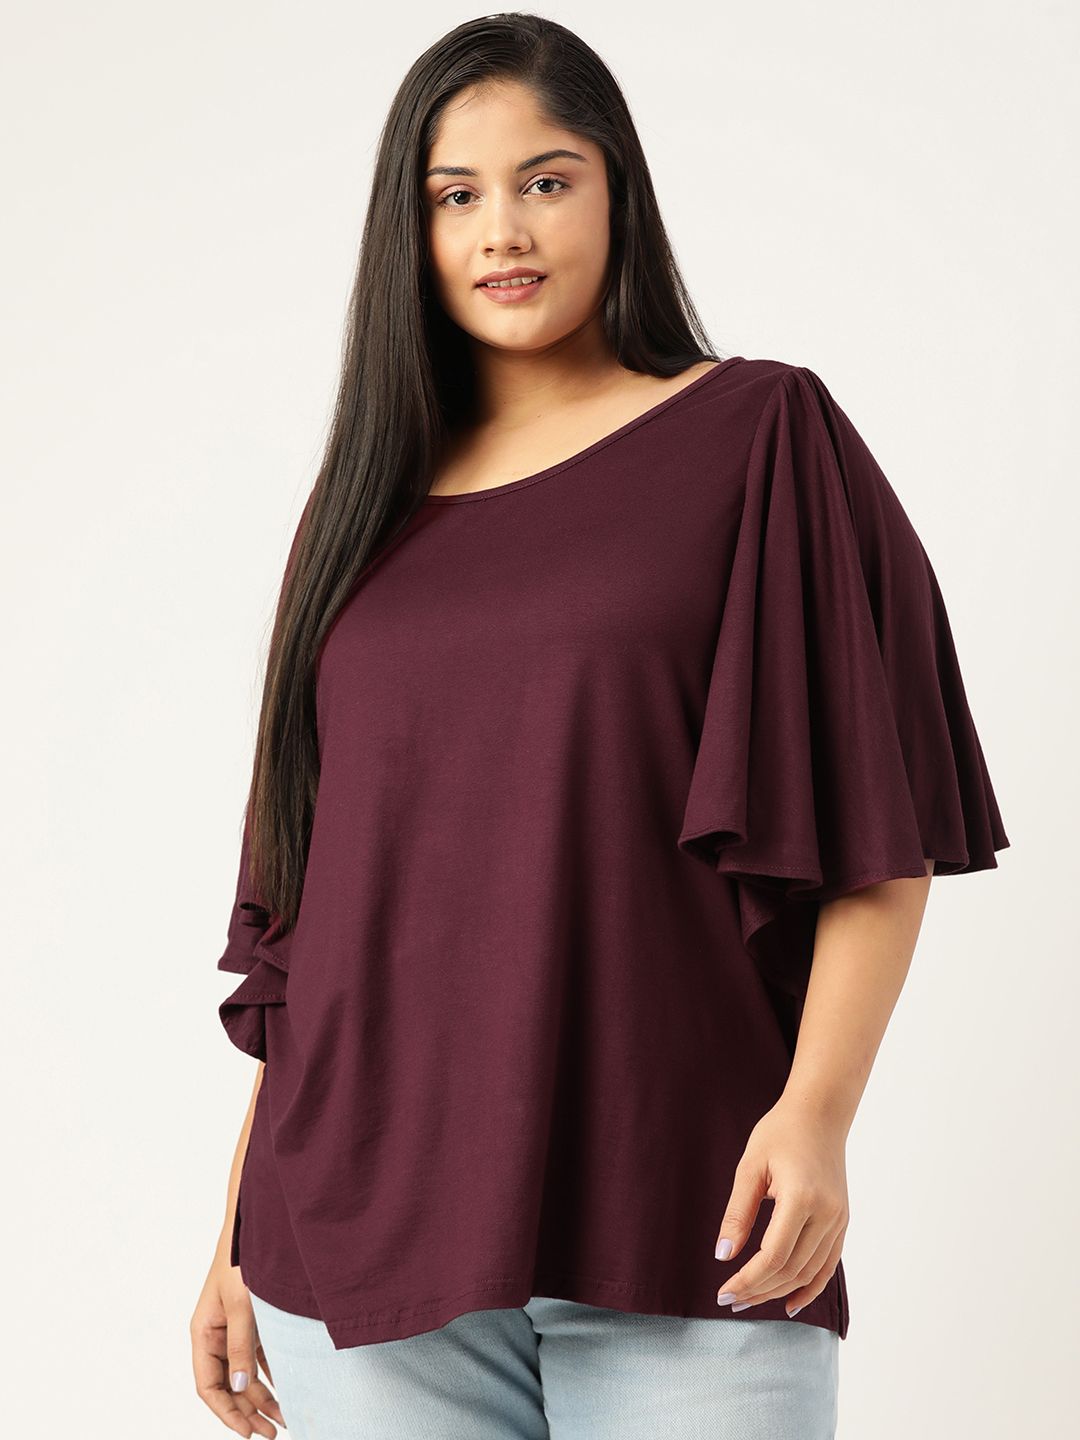 theRebelinme Burgundy Solid Plus Size Top Price in India